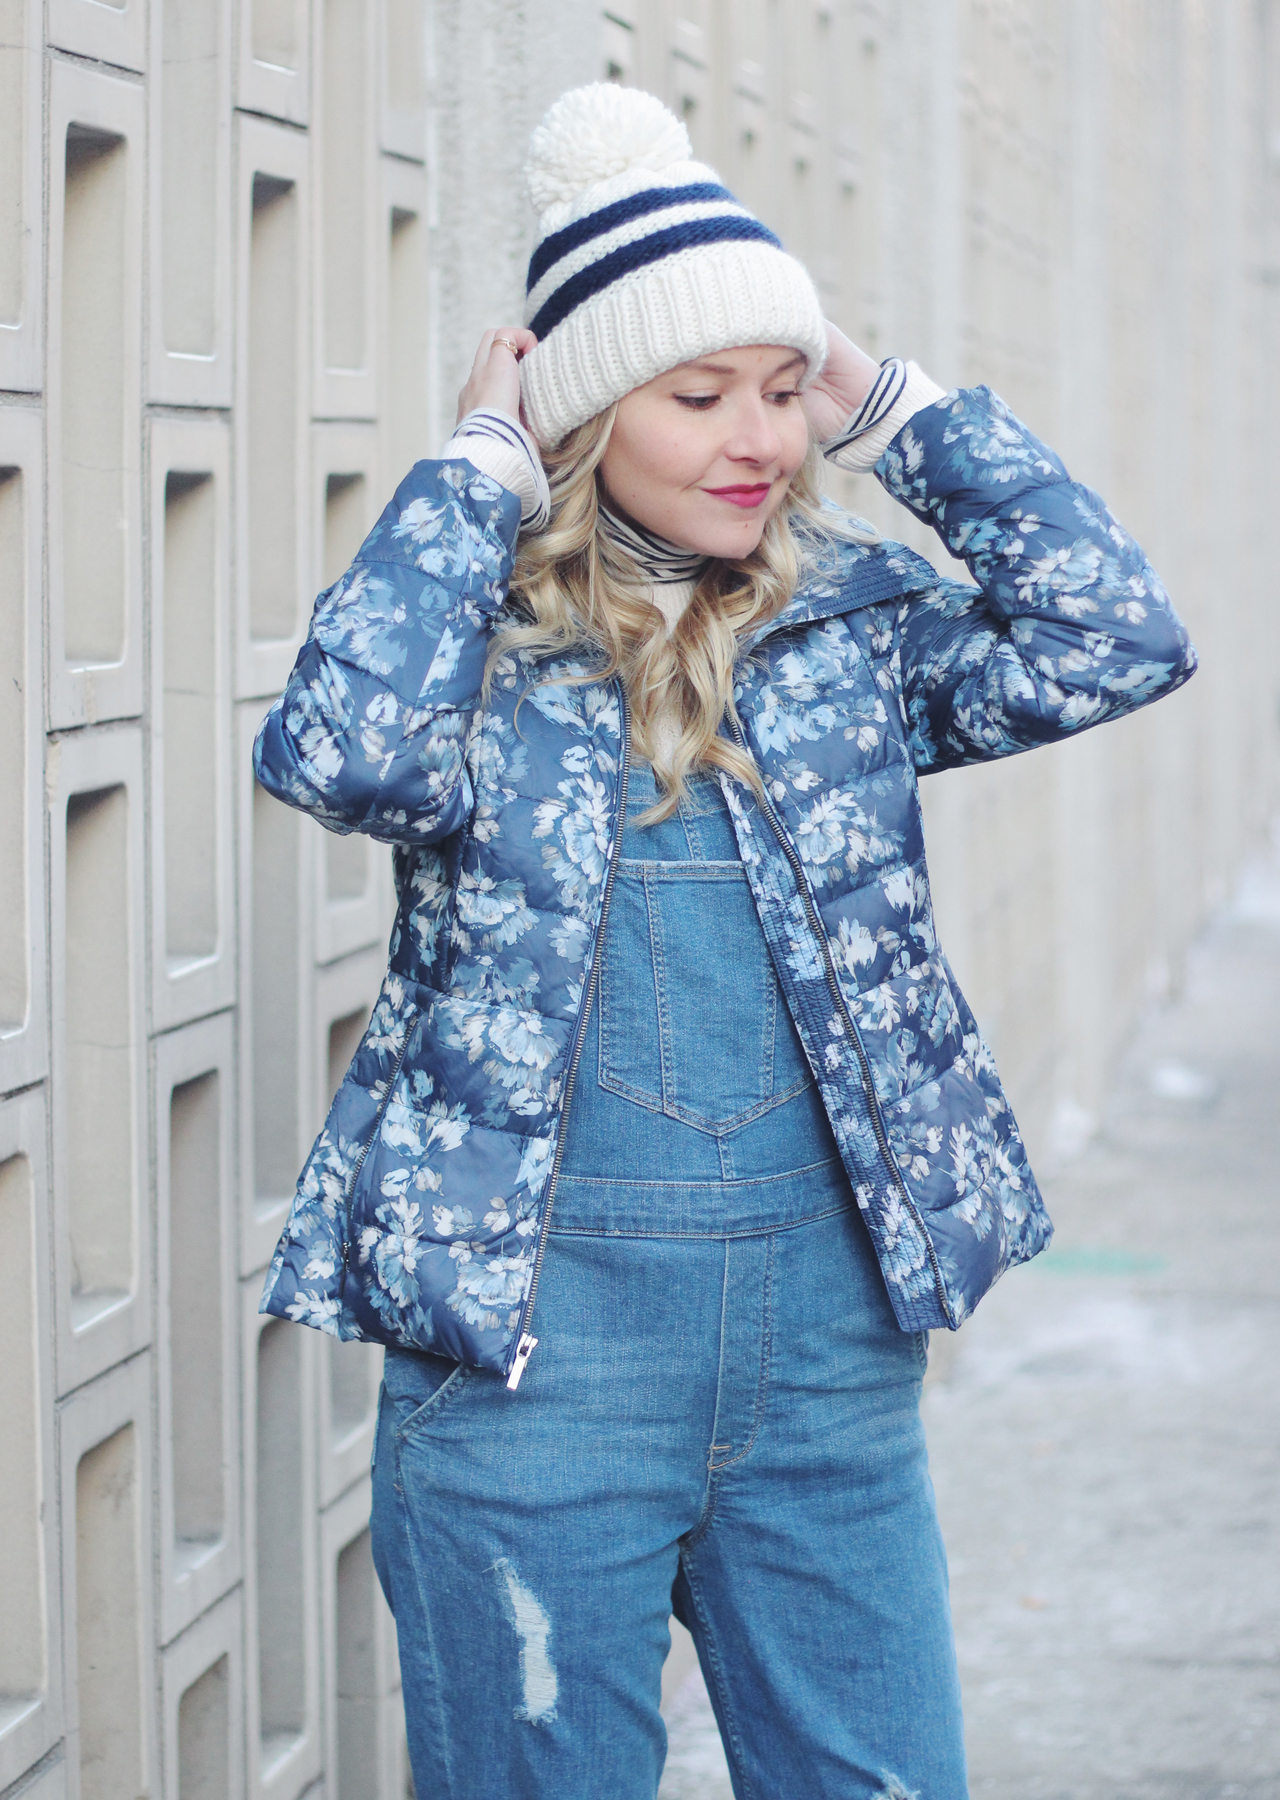 The Steele Maiden: Casual Winter Layers - Floral Puffer Jacket